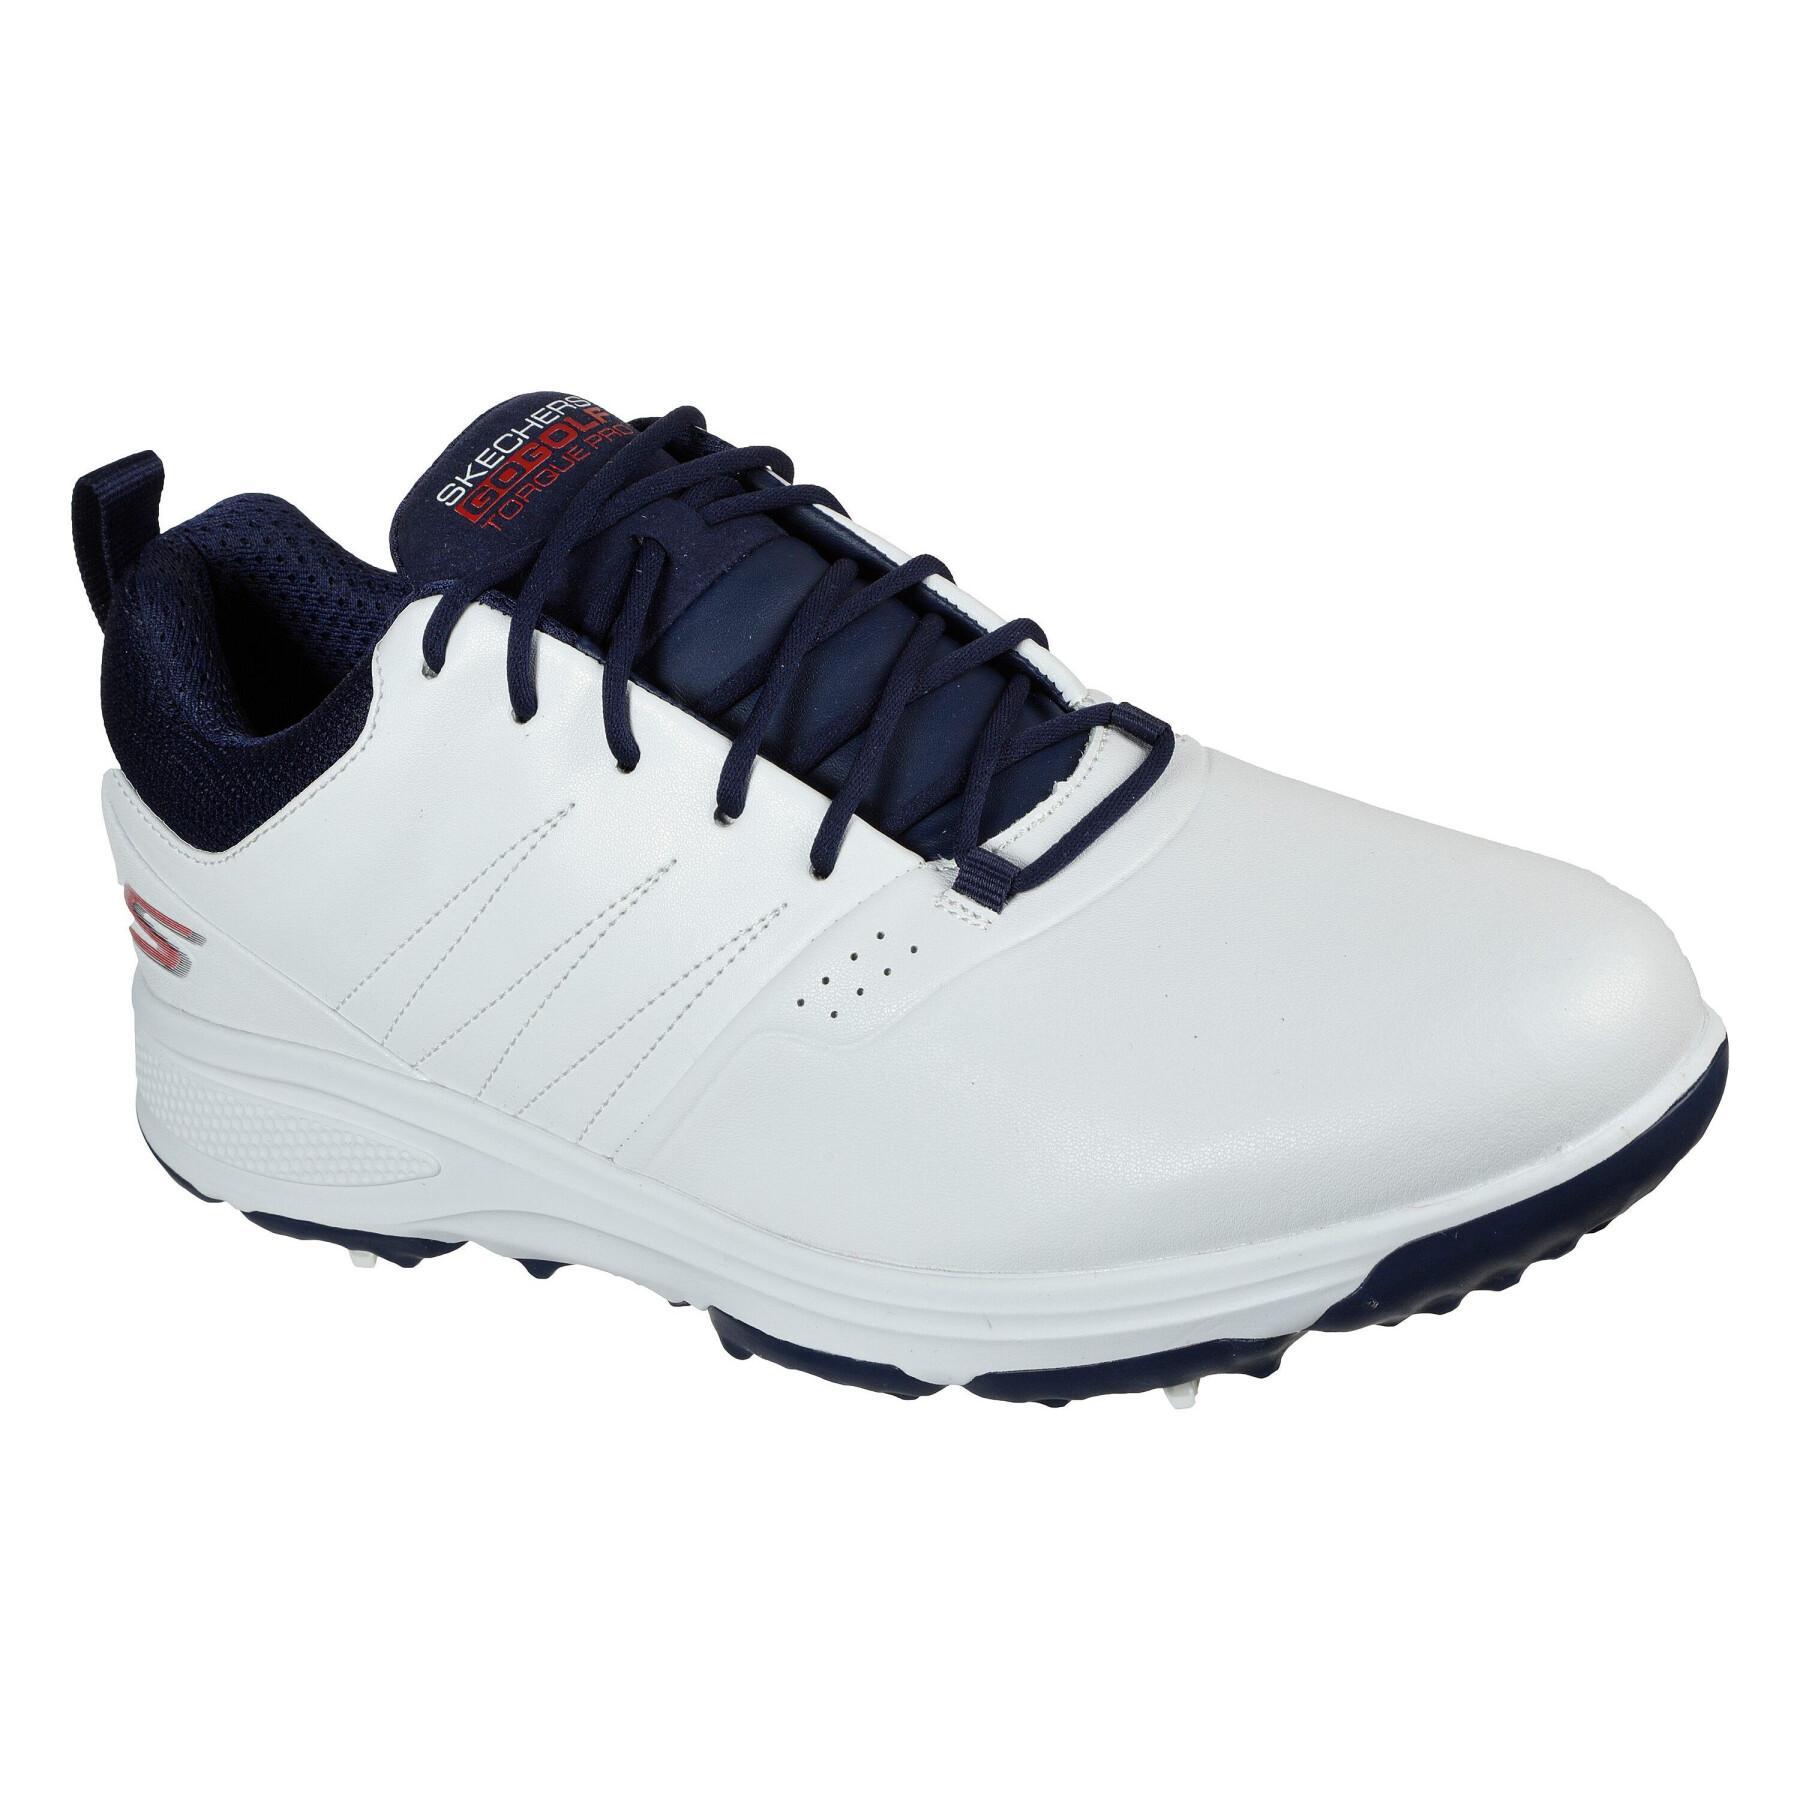 Golf shoes with spikes Skechers GO GOLF Torque